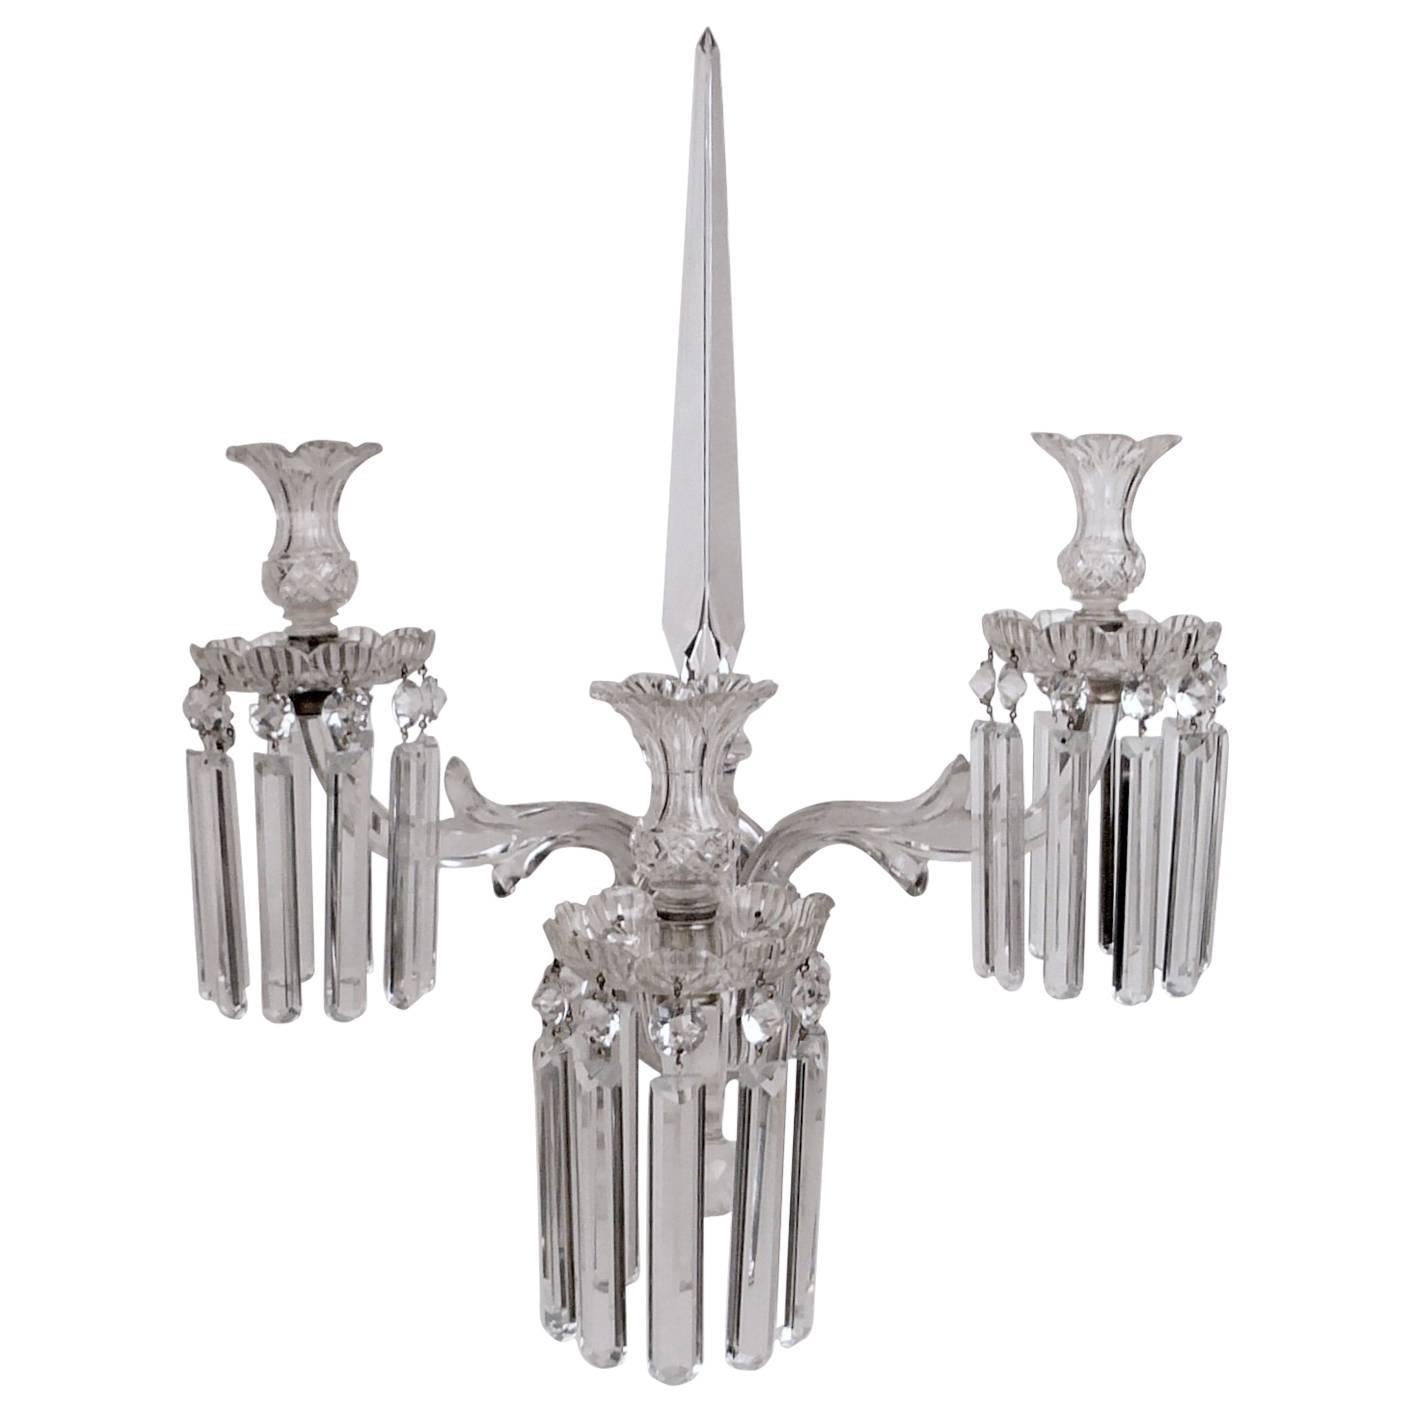 Large Scale 19th Century English Cut Crystal Single Sconce